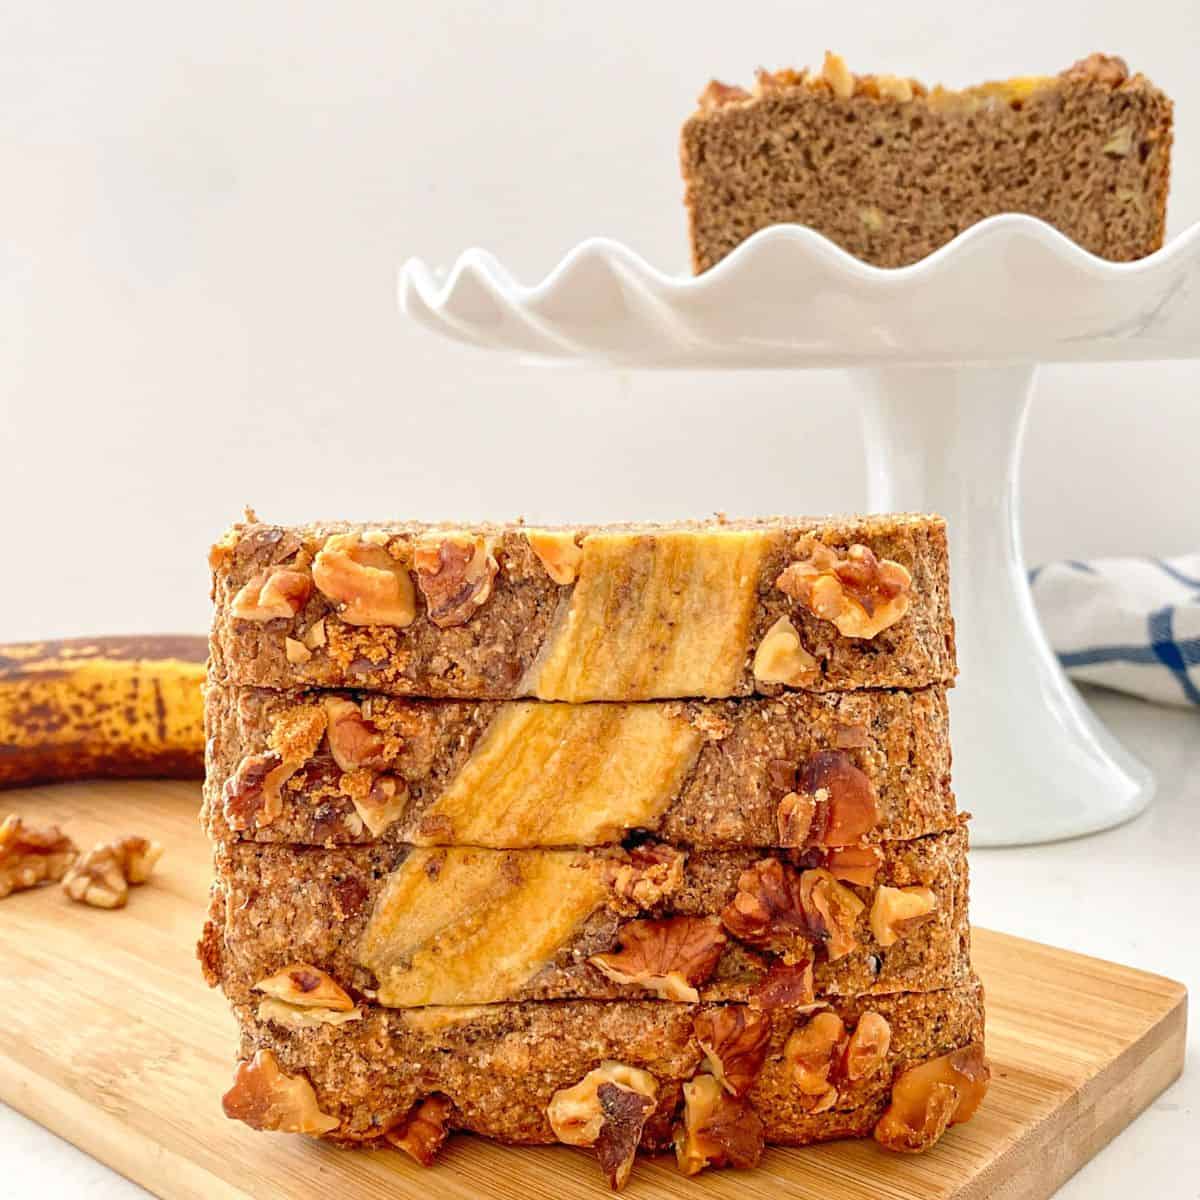 Four slices of banana bread stacked vertically on cutting board.